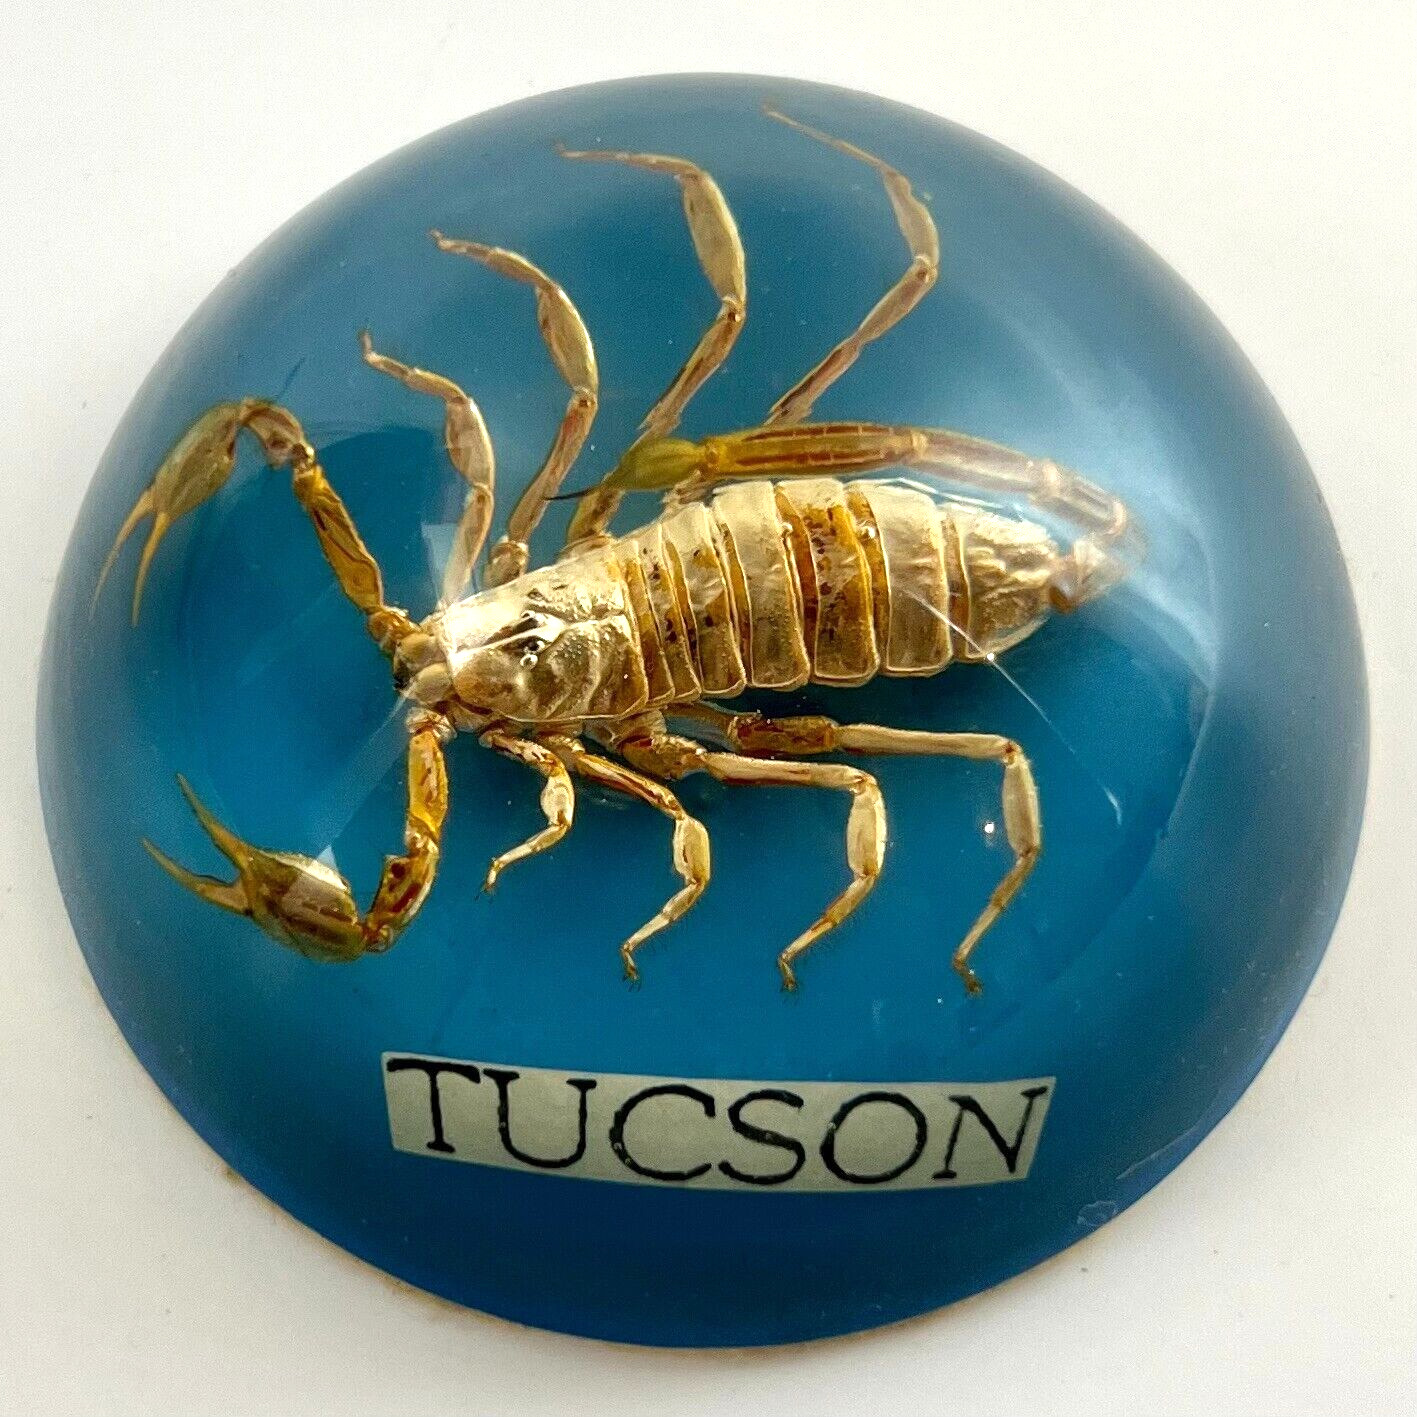 Vintage Tuscon Arizona Scorpion Paperweight Acrylic Dome Shape 4 in Real Insect